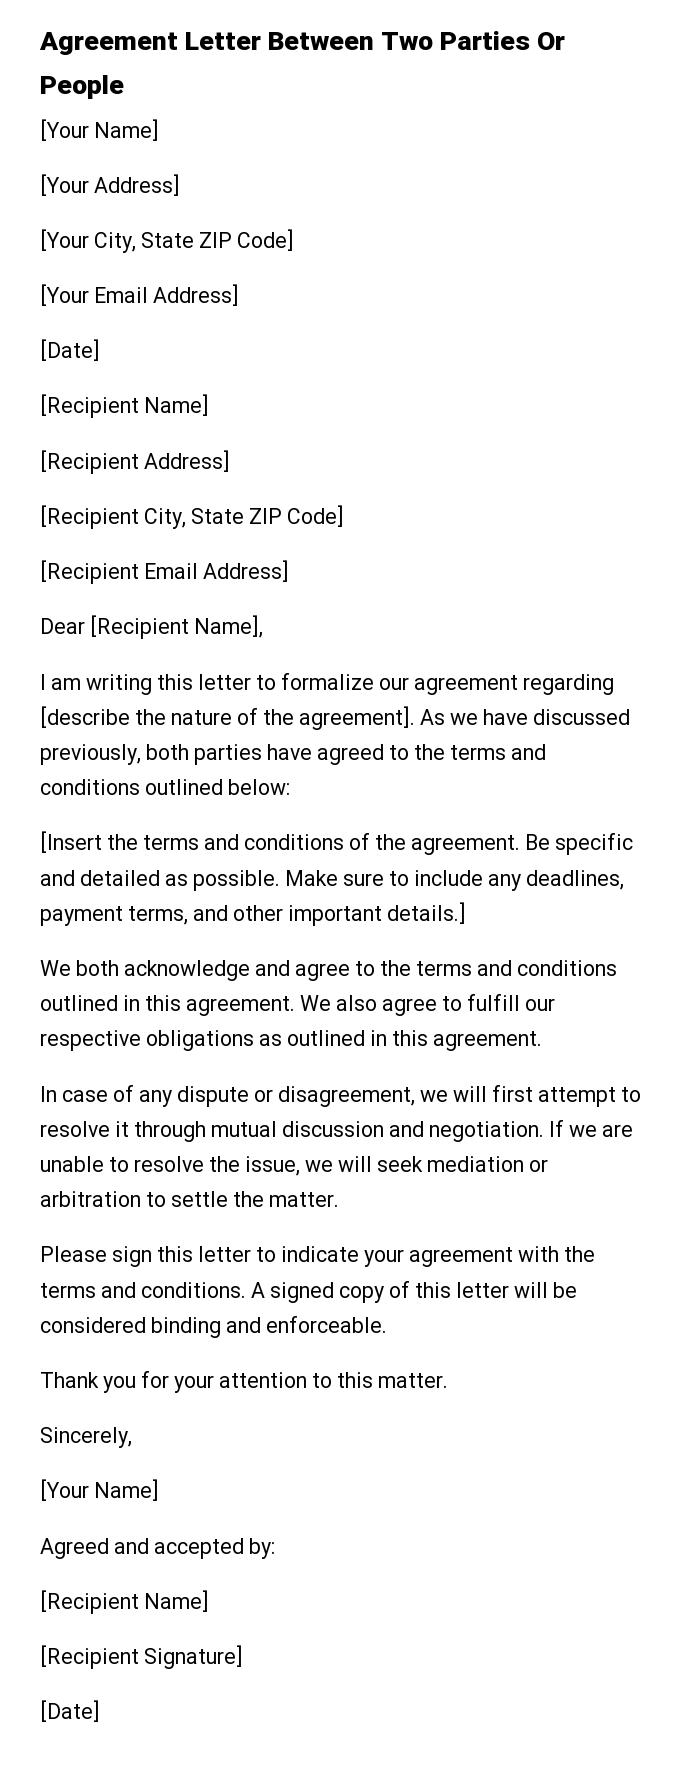 Agreement Letter Between Two Parties Or People